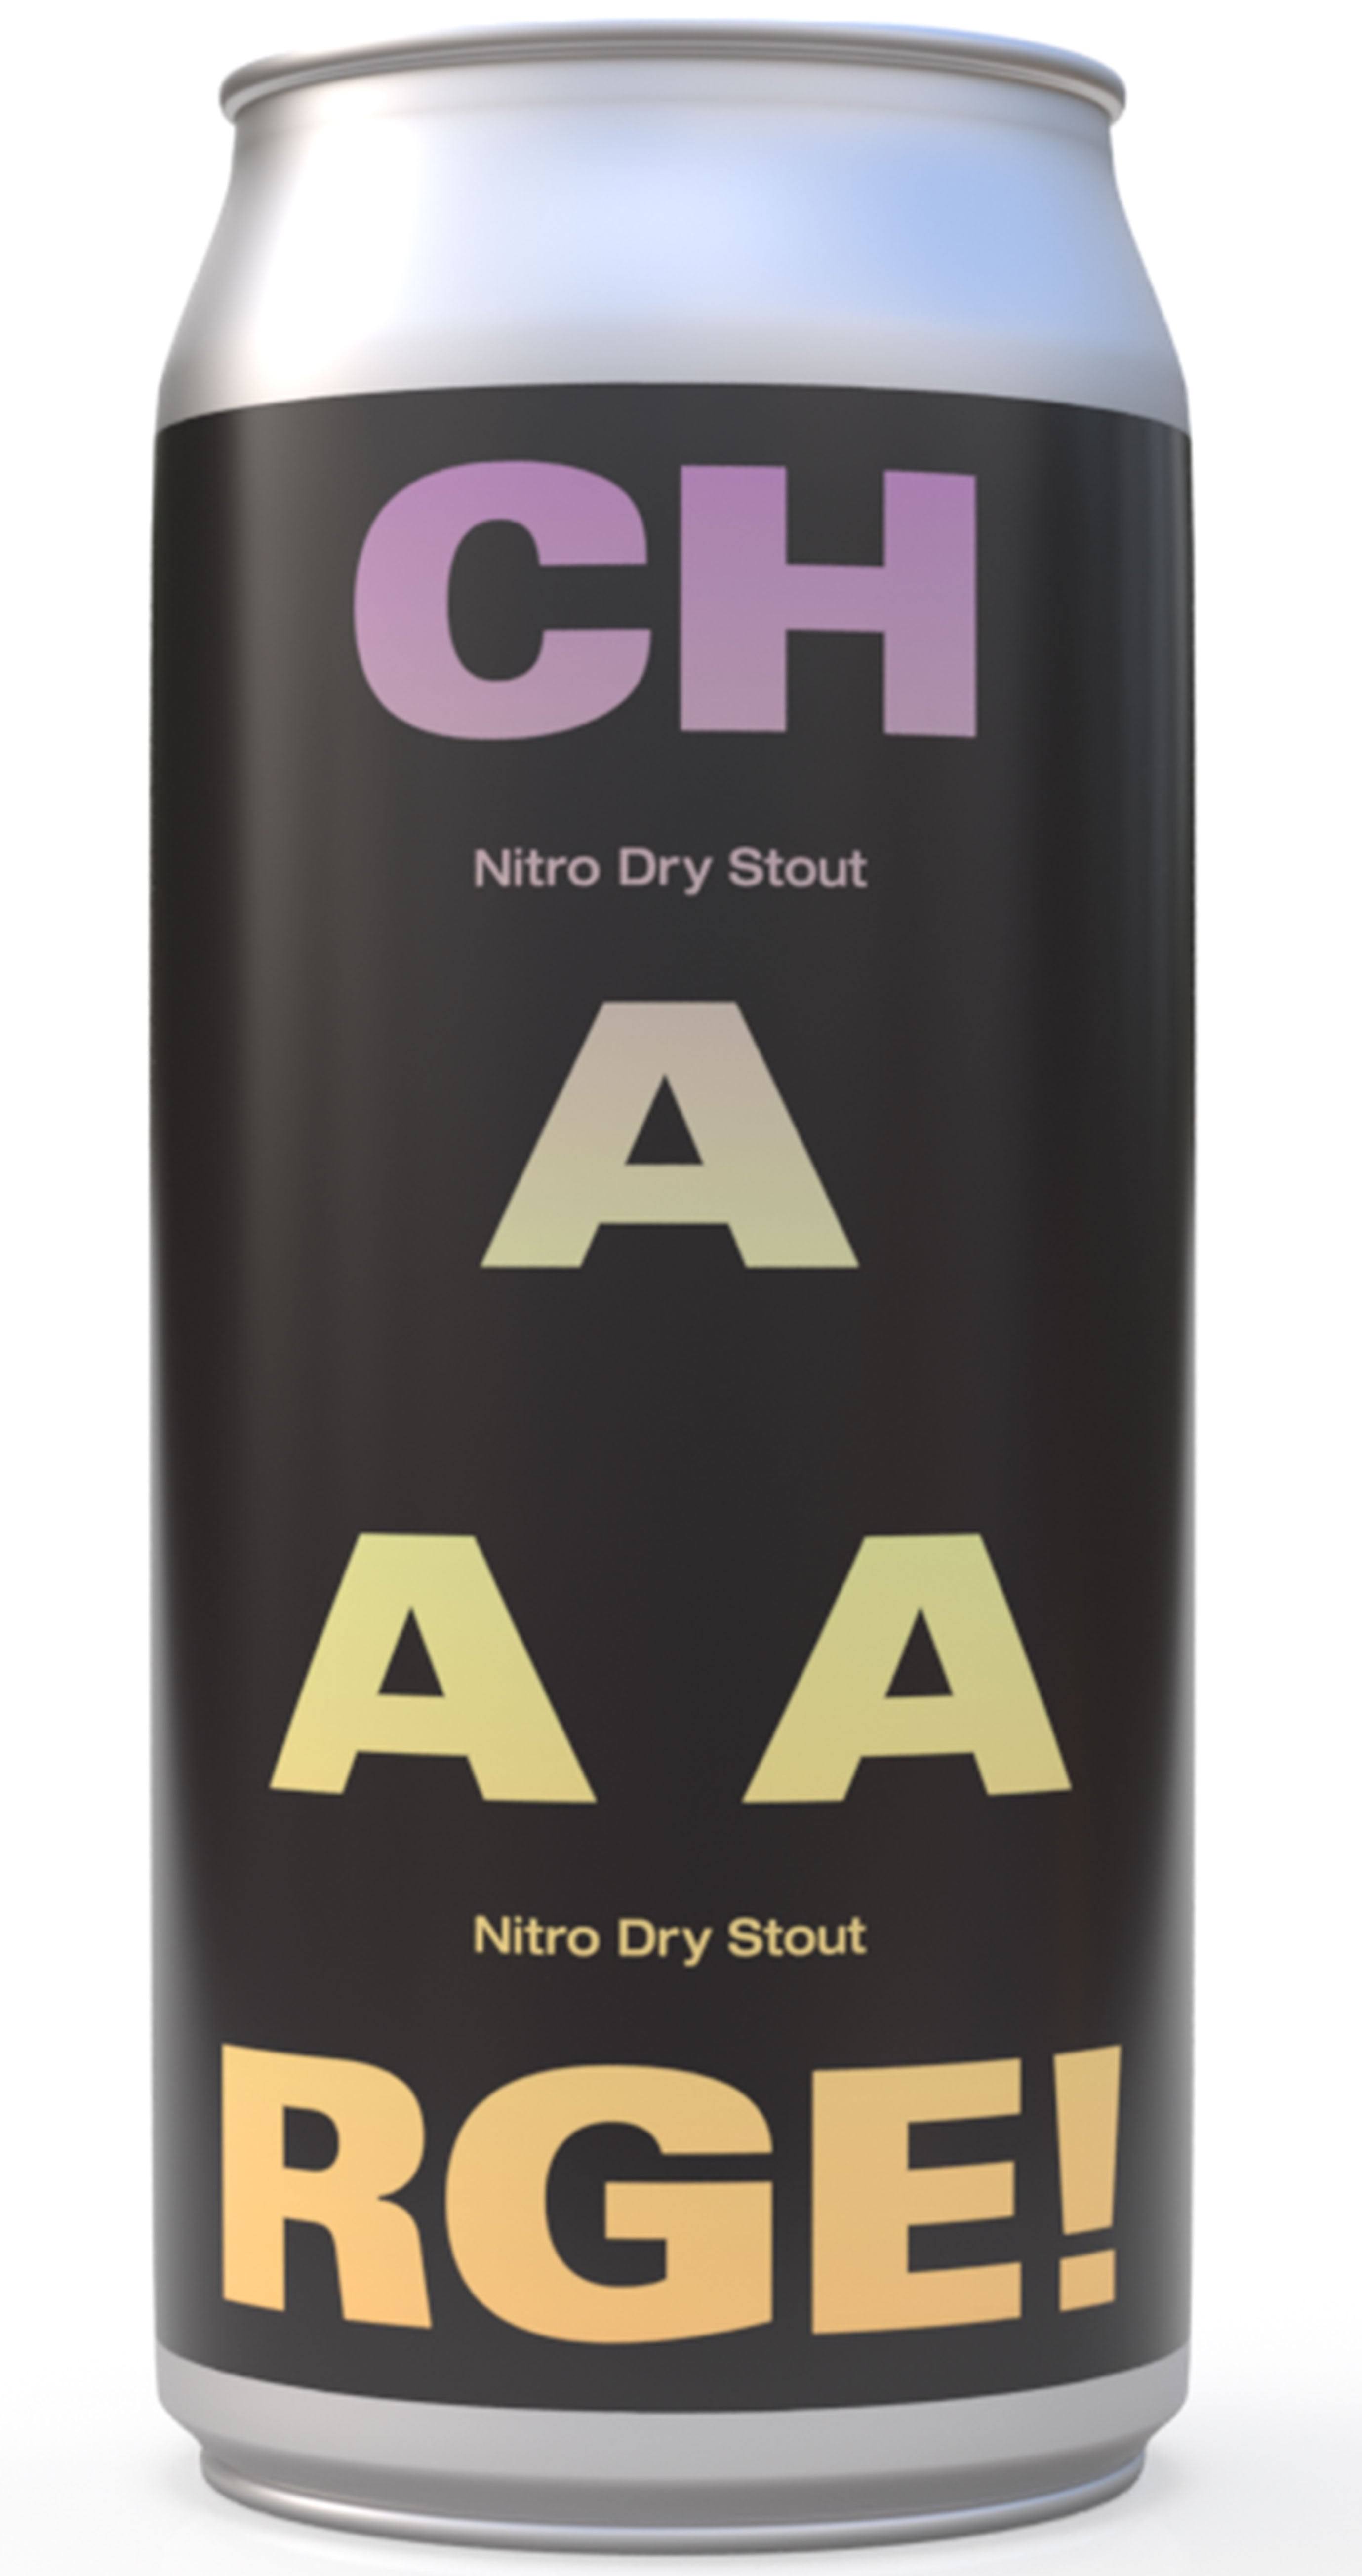 To Øl - Chaaarge! Nitro Dry Stout 4.0% ABV 500ml Can